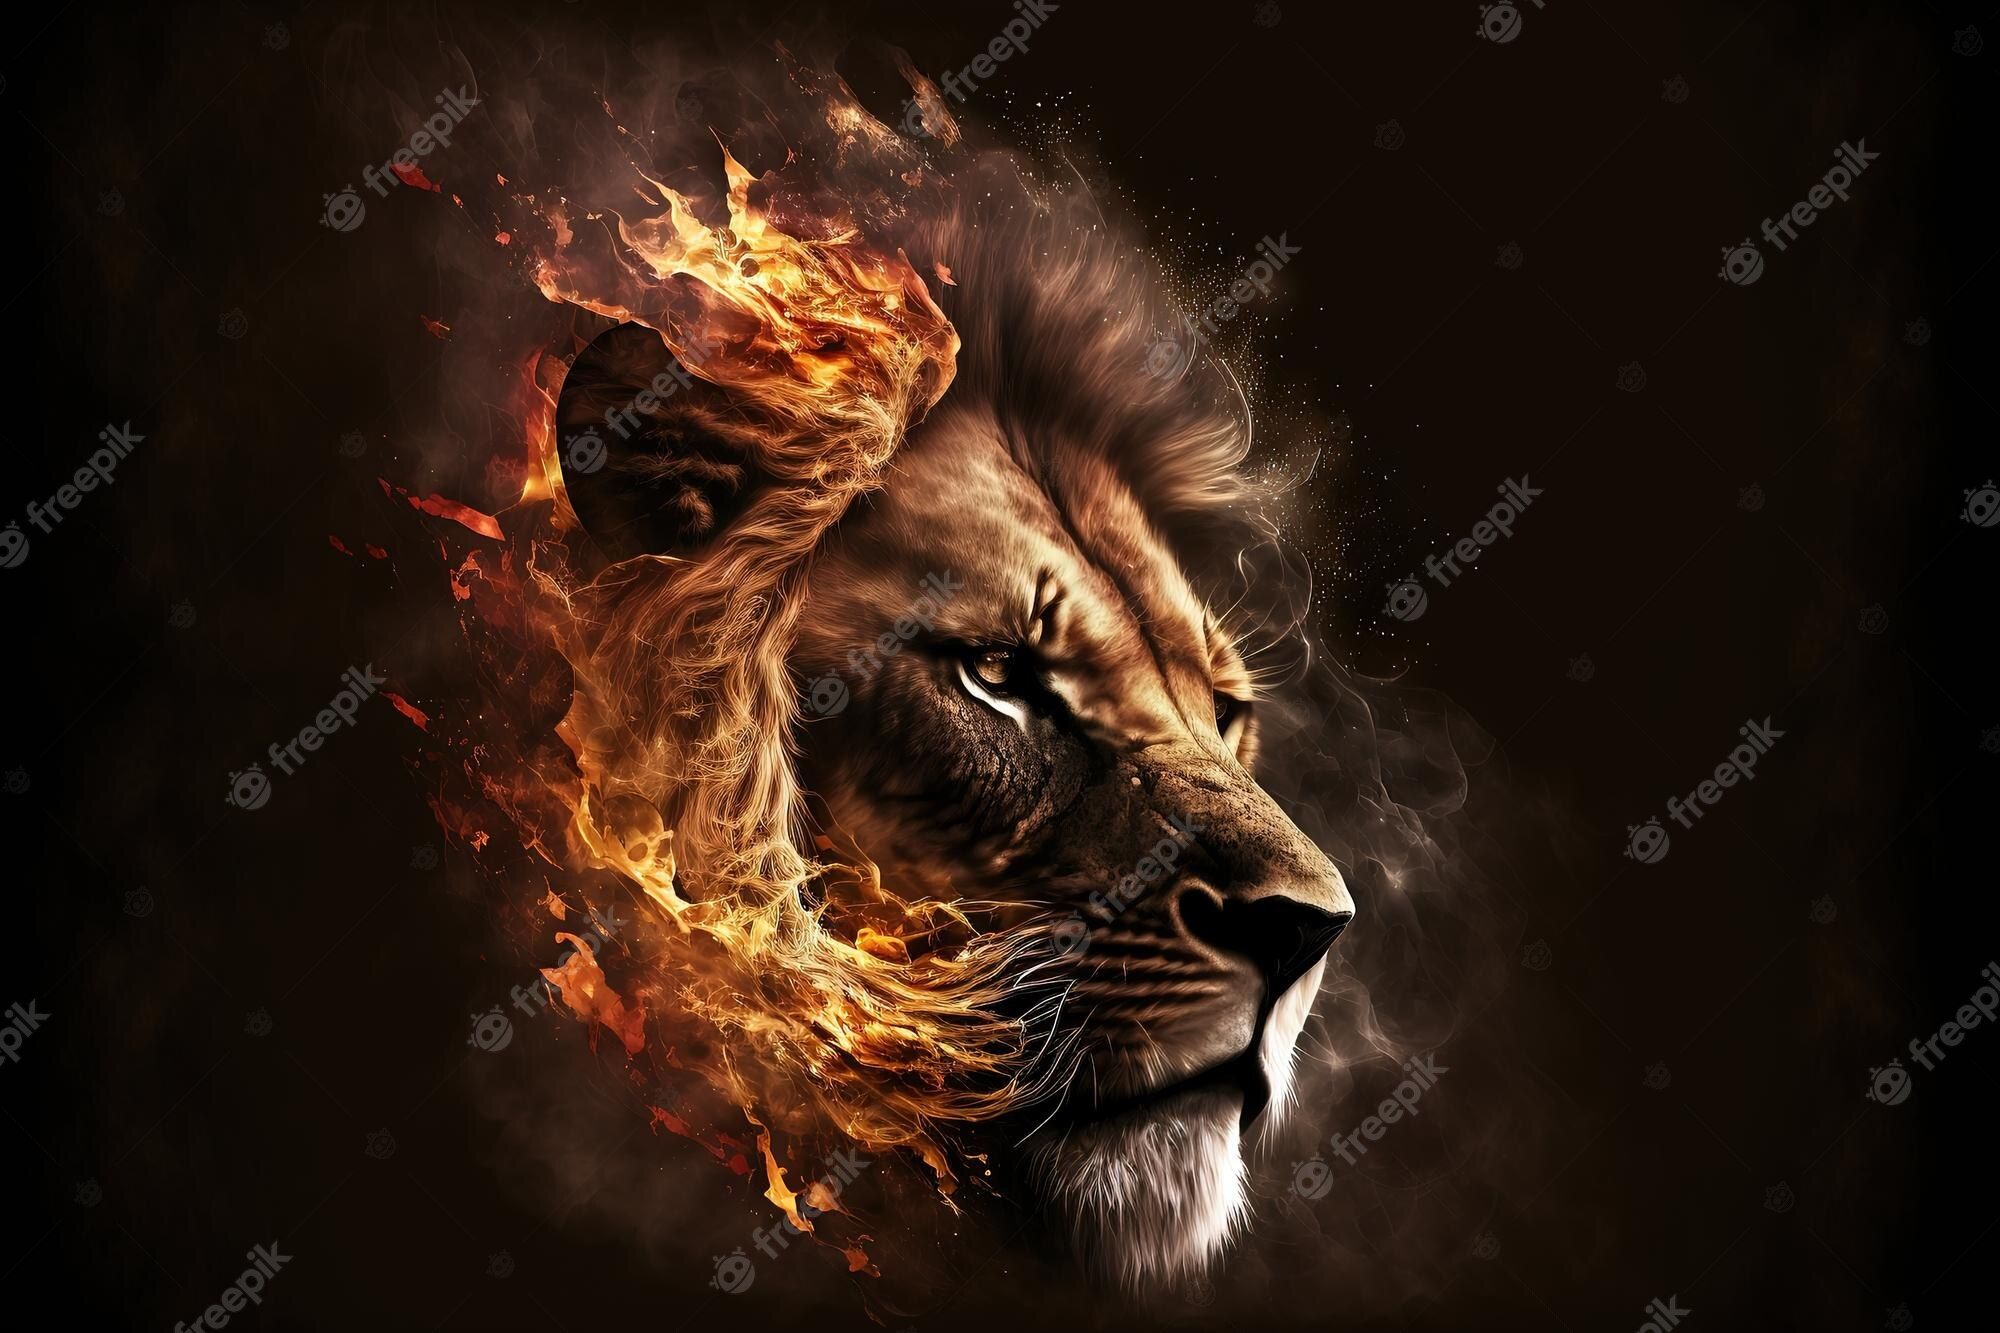 A lion with fire on its head - Lion